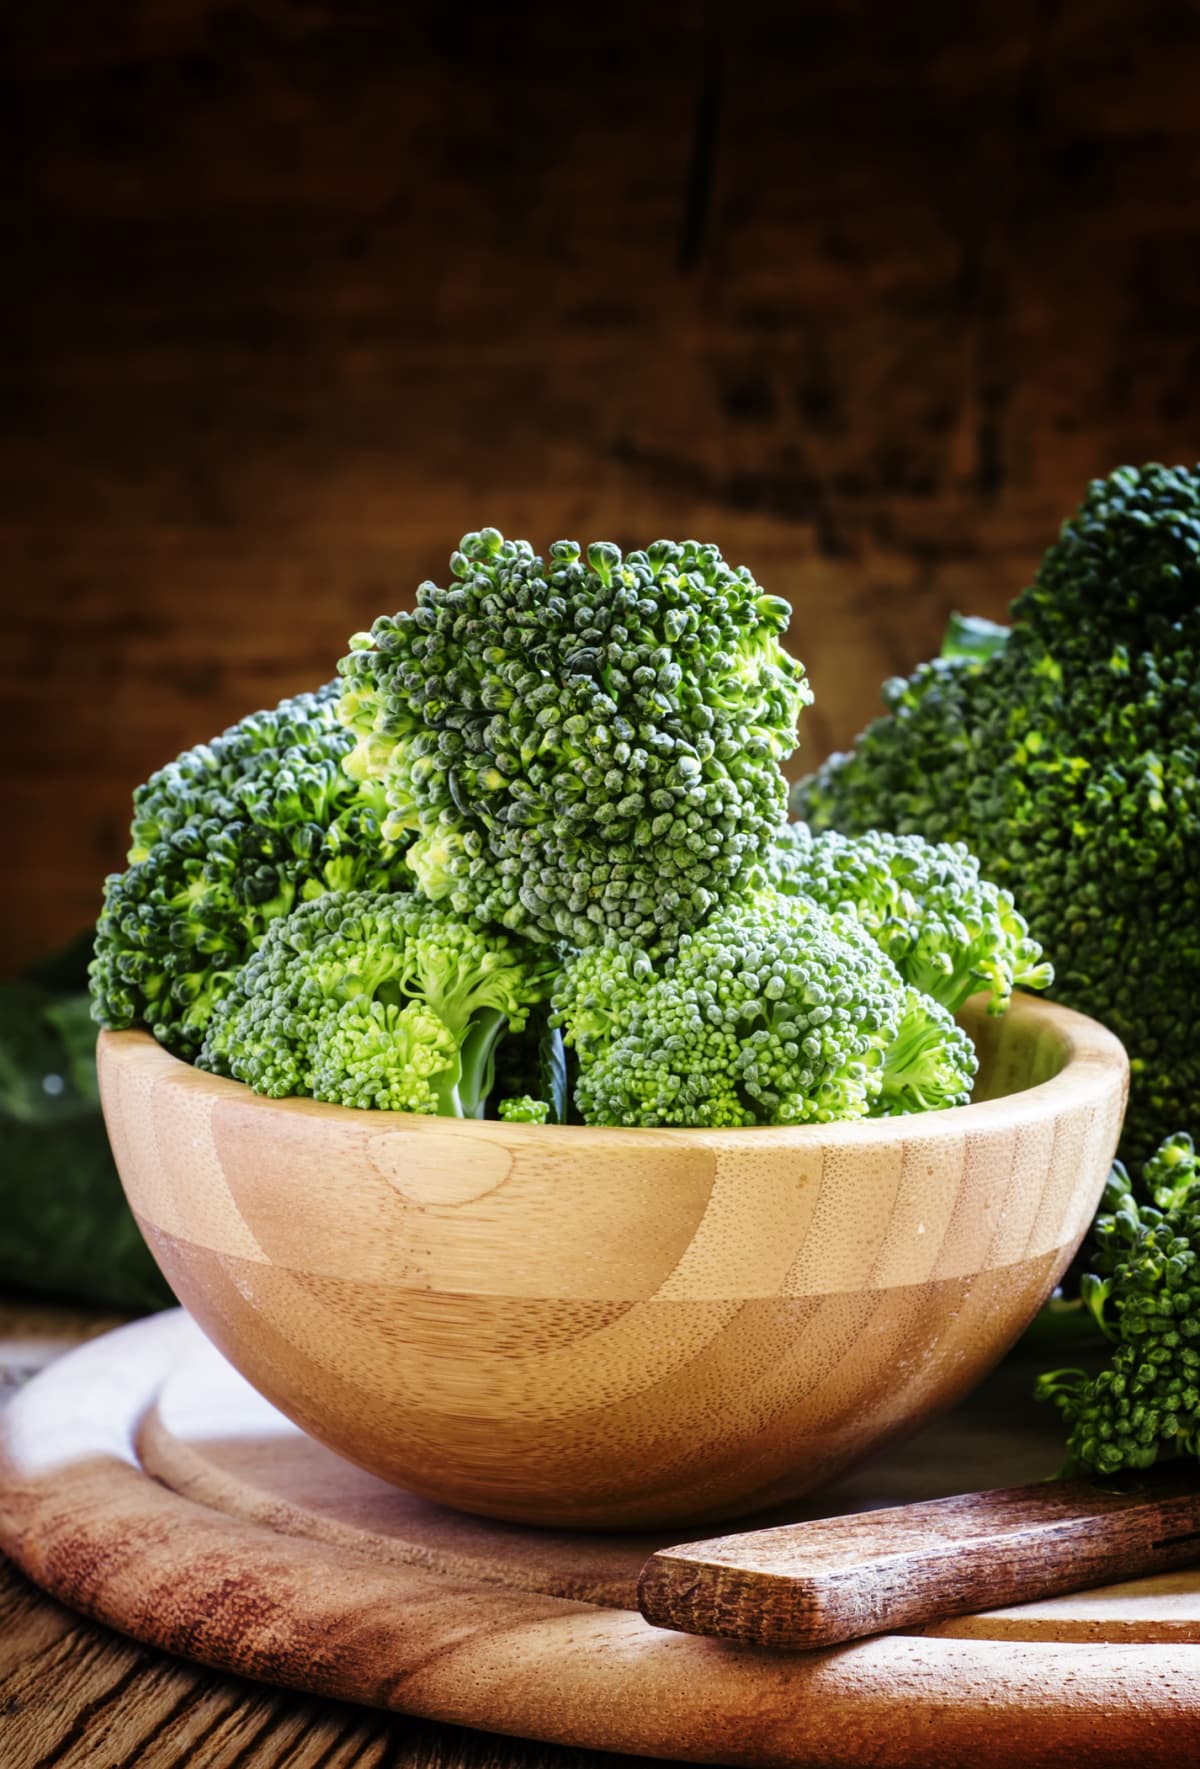 Roasted broccoli in a bowl.